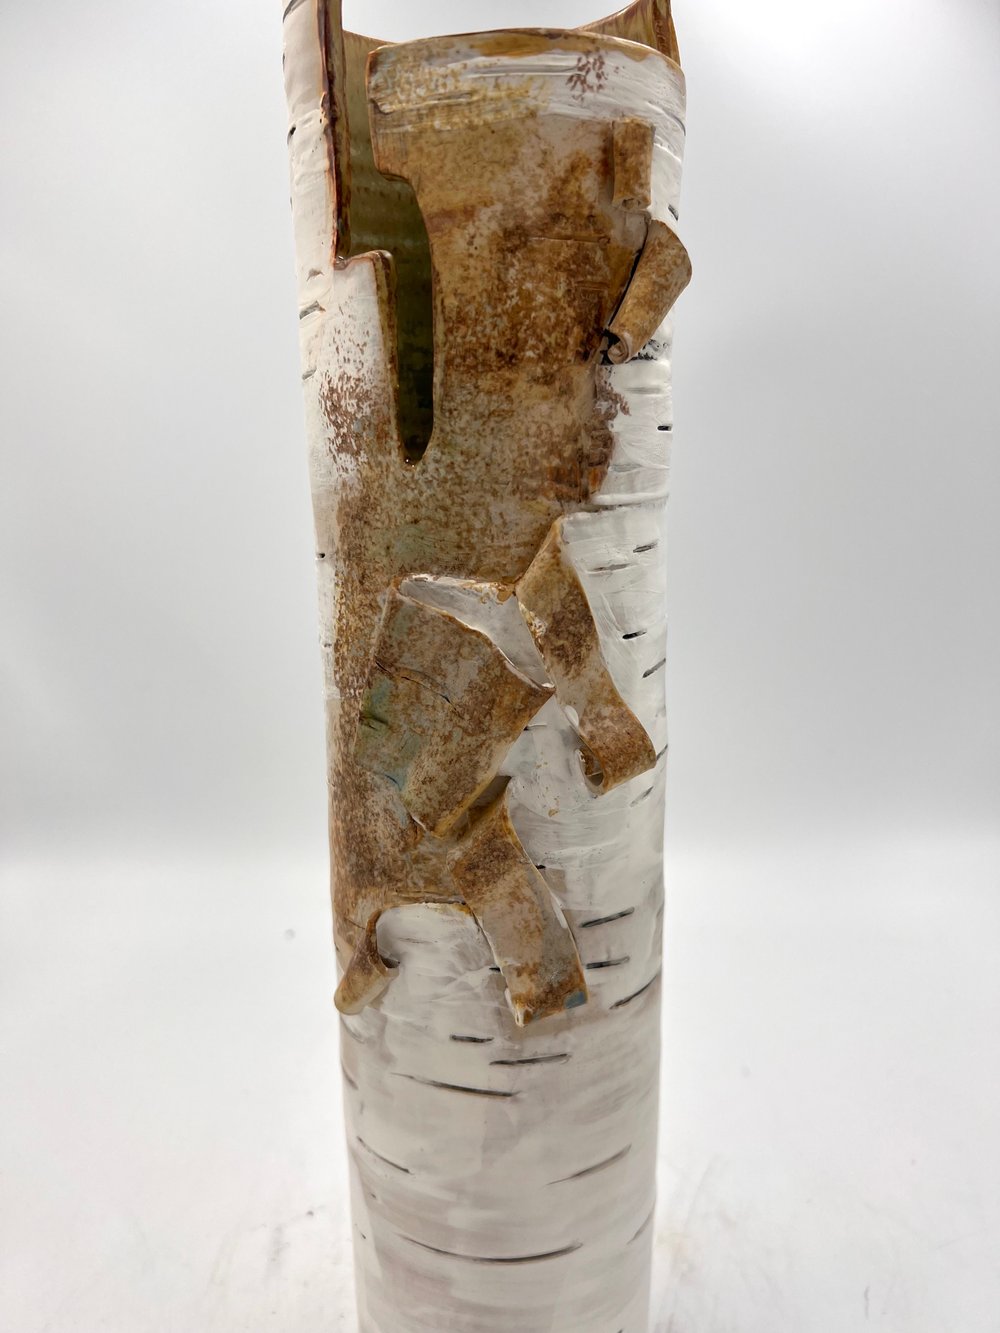 Image of Birch Vessel with earthy interior